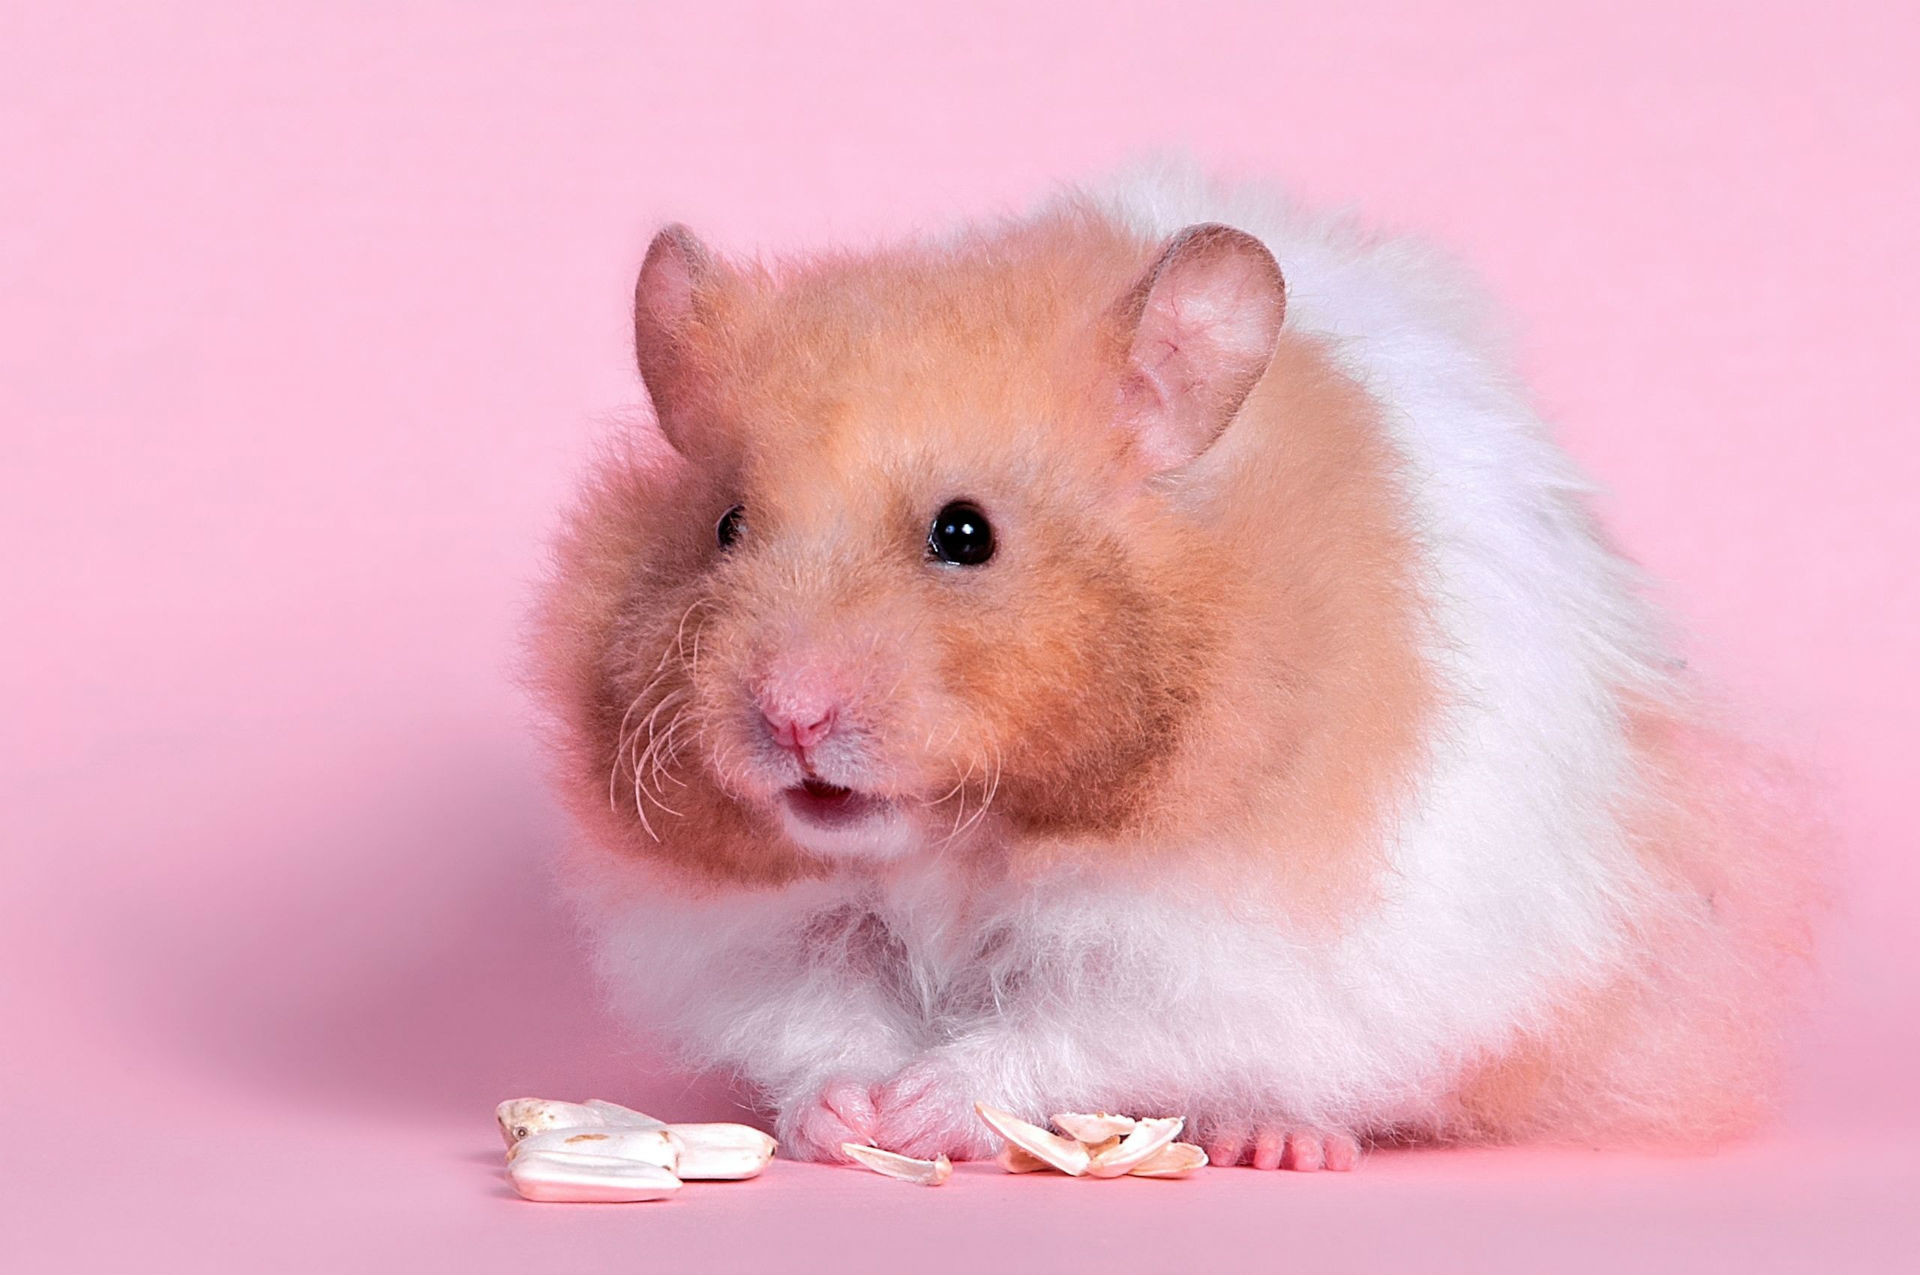 1920x1275 Animal - Hamster Rodent Cute Furry Wallpaper